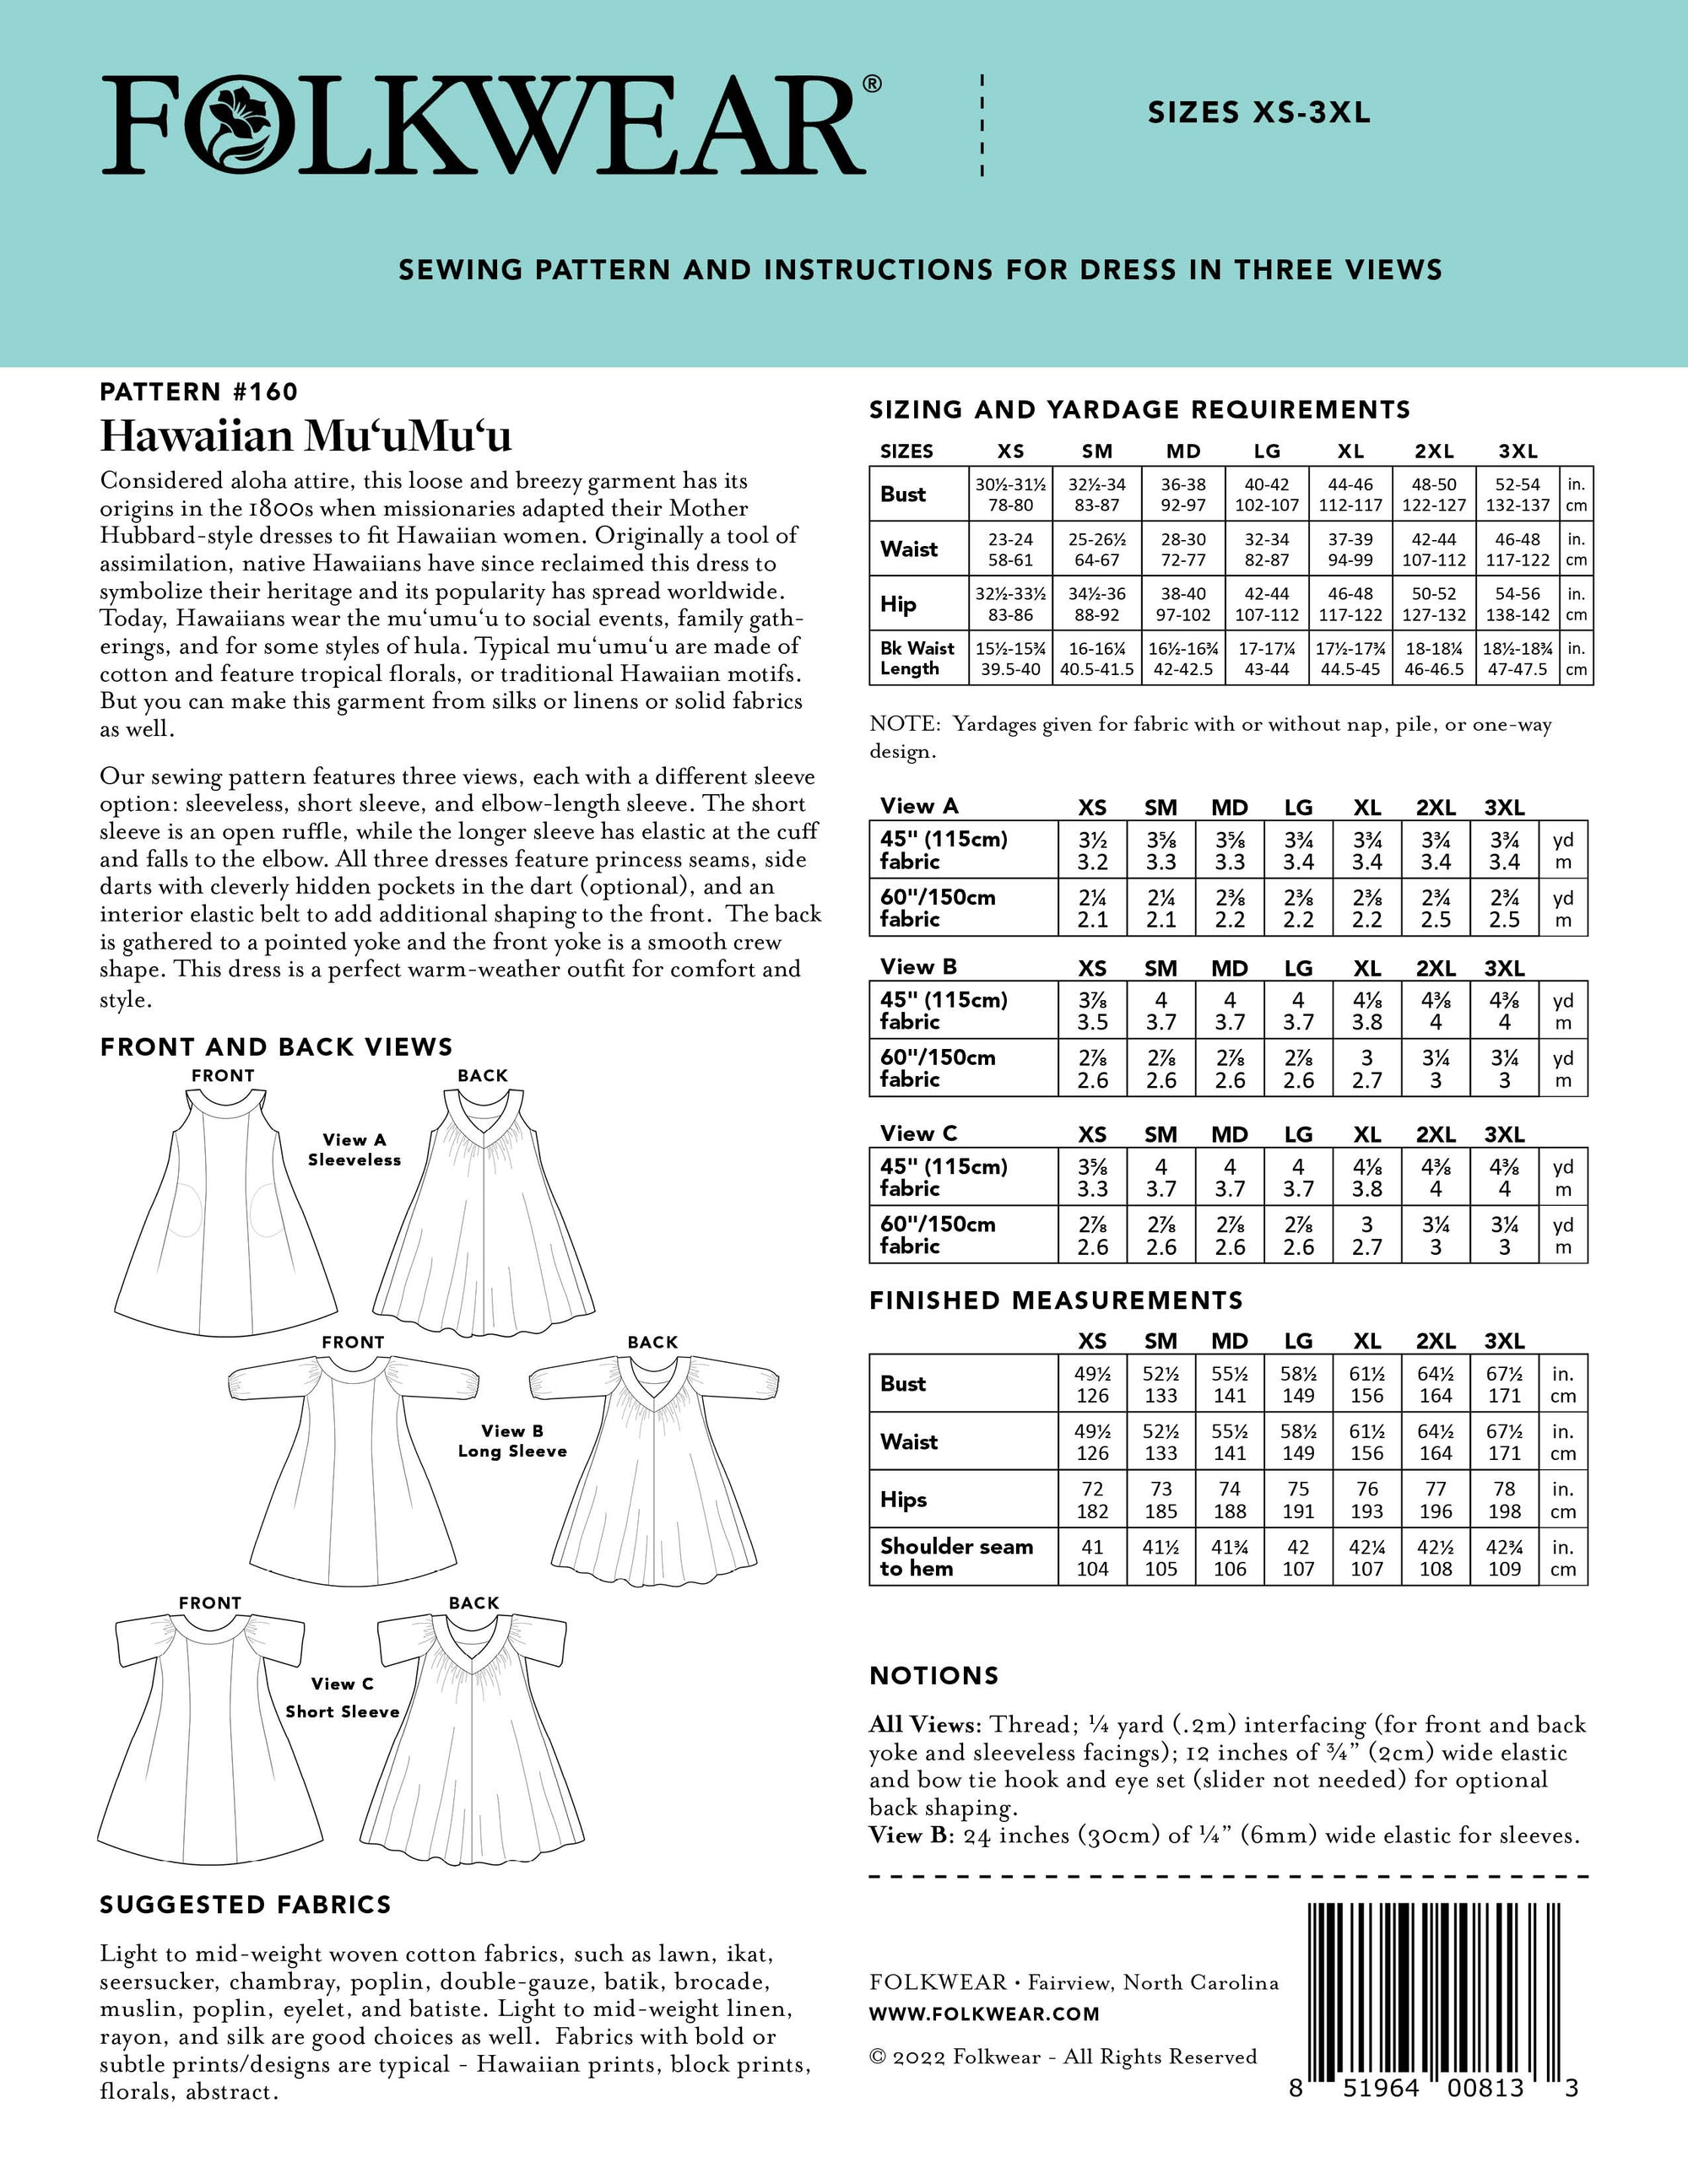 Back cover of the pattern with line drawings, sizing charts, fabric suggestions, and notions.